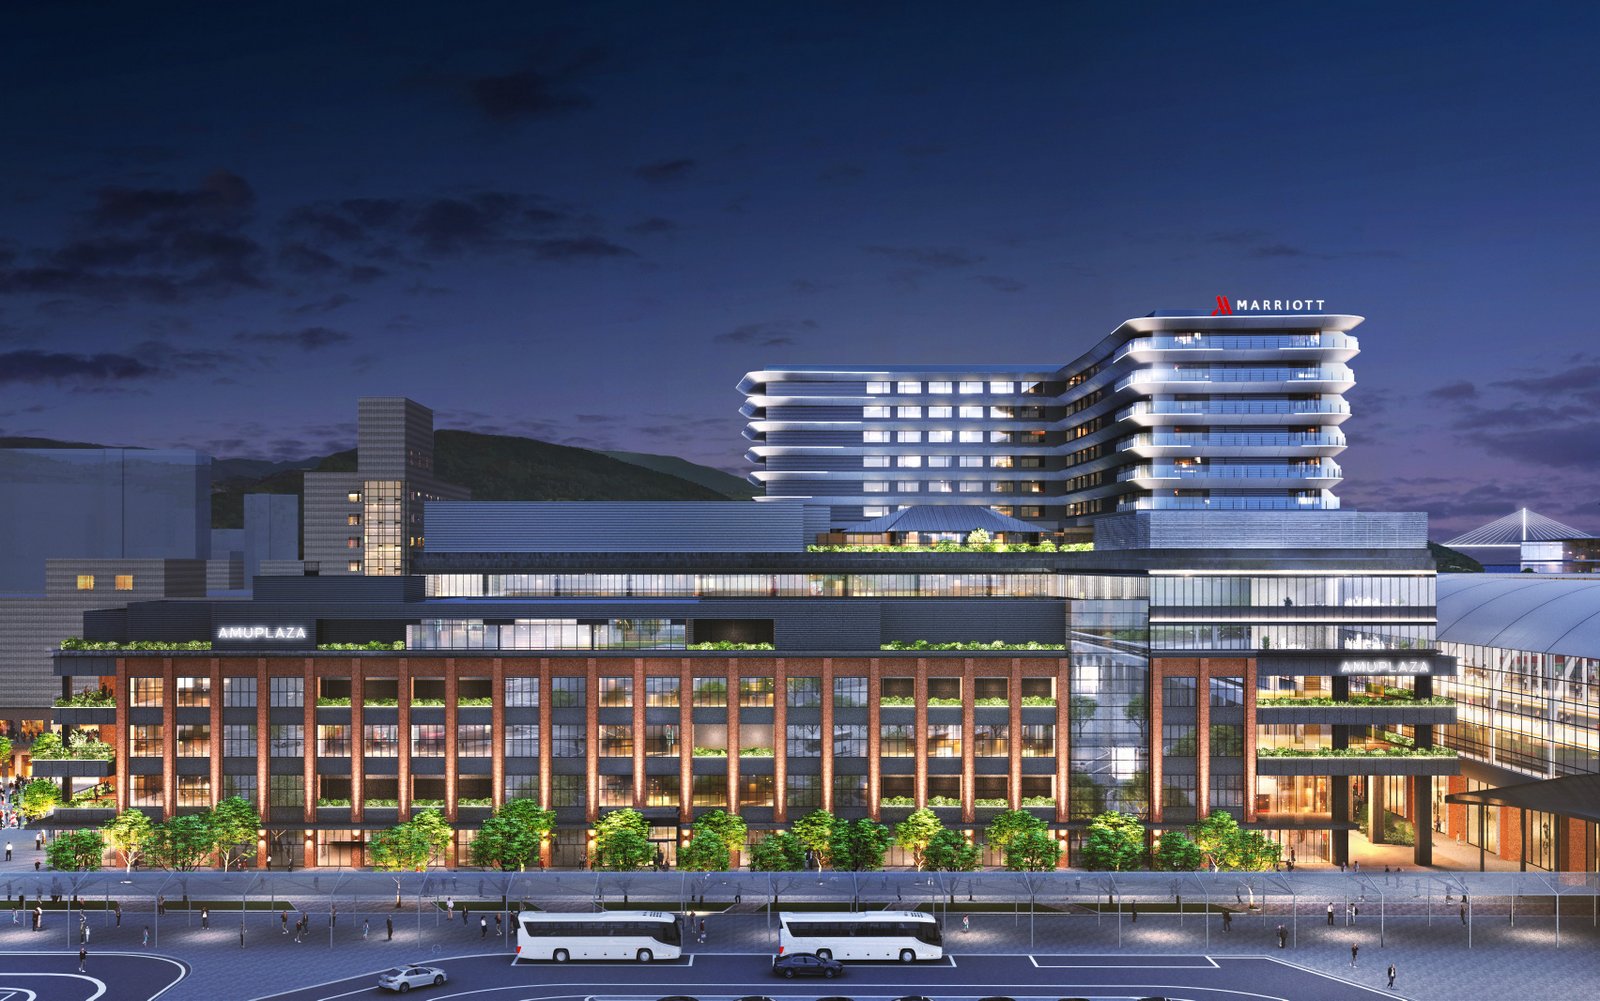 Marriott International Signed The Contract With Kyushu Railway For Their First Kyushu Location